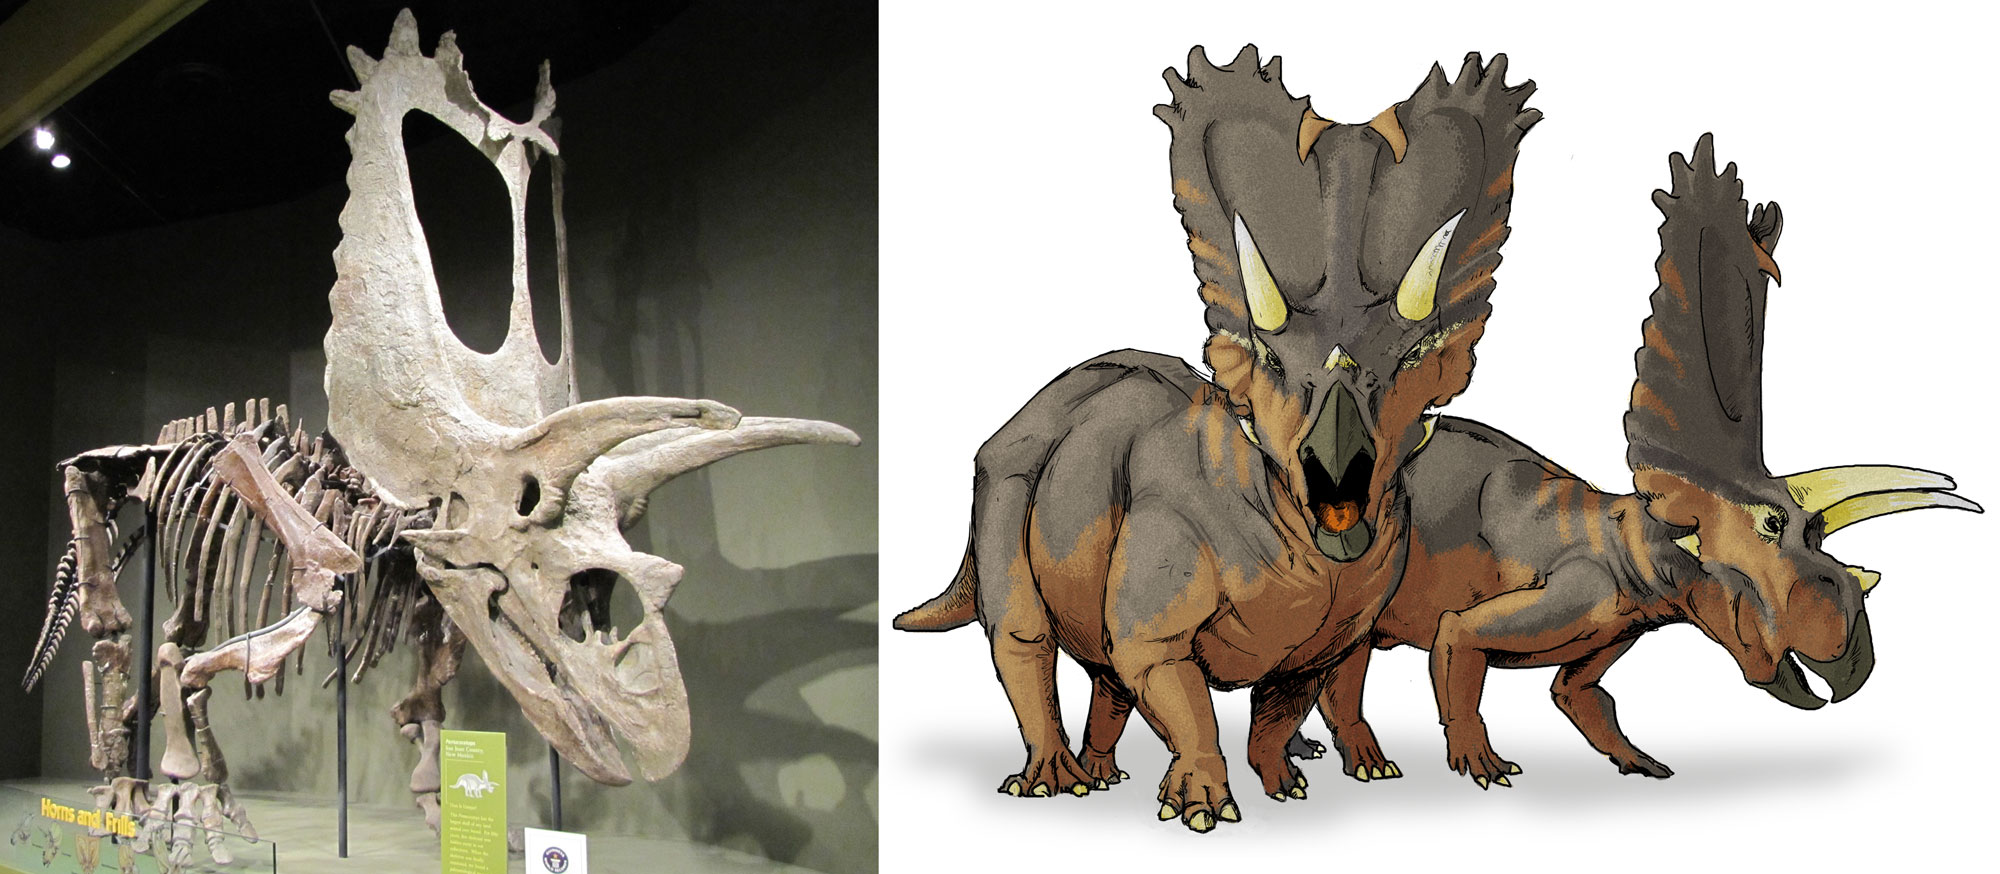 2-panel figure of Titanoceratops from the Cretaceous of New Mexico. Panel 1: Photograph of a mounted skeleton of Titanoceratops on display at a museum.Panel 2: Drawing reconstructing the animals in life. The animals are four-gelled with stout bodies and relatively short tails and necks. The head has a large frill, a long horn over each eye, and a small nose horn. The mouth is beak-like.